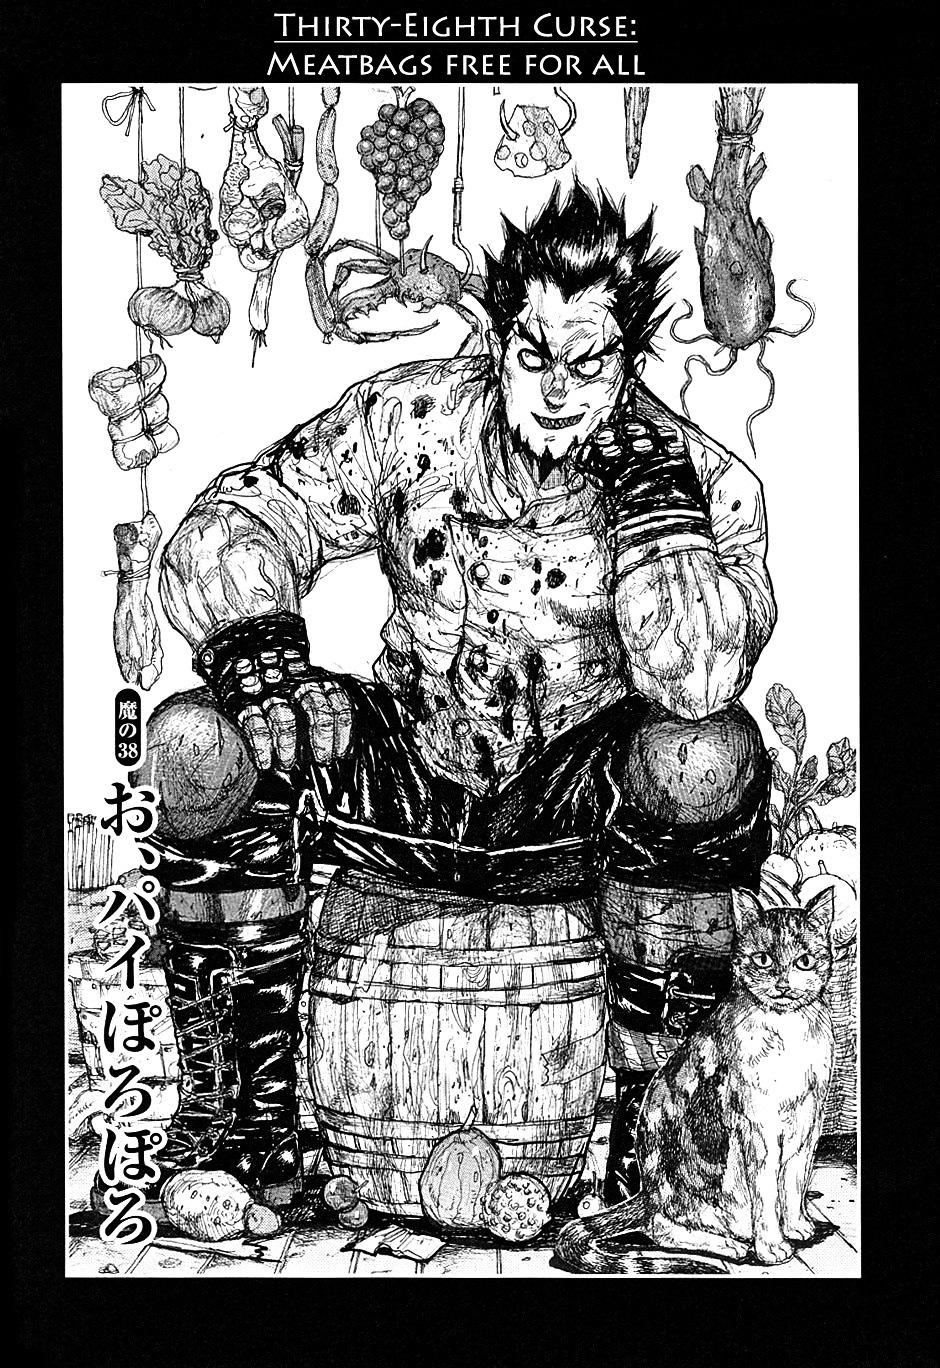 Dorohedoro Chapter 38 : Meatbags Free For All page 1 - Mangakakalot